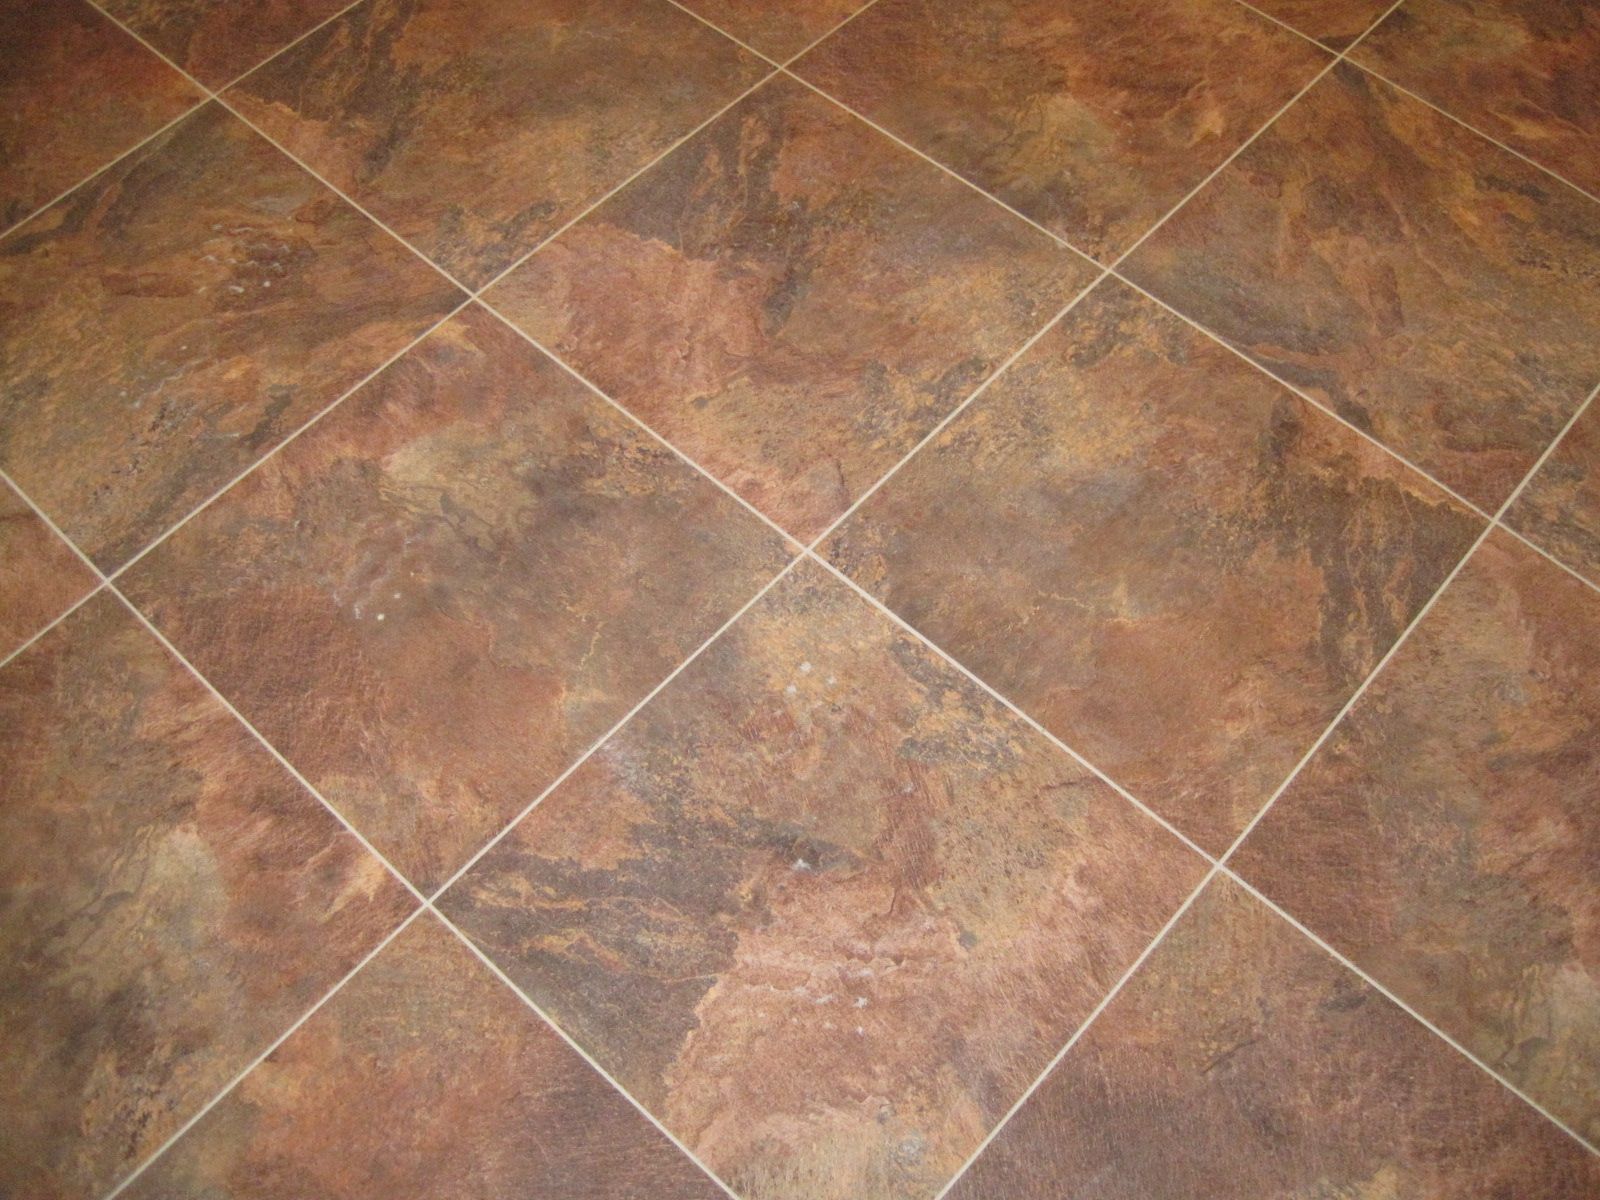 Prescott Valley Tile and Grout Cleaning Professional